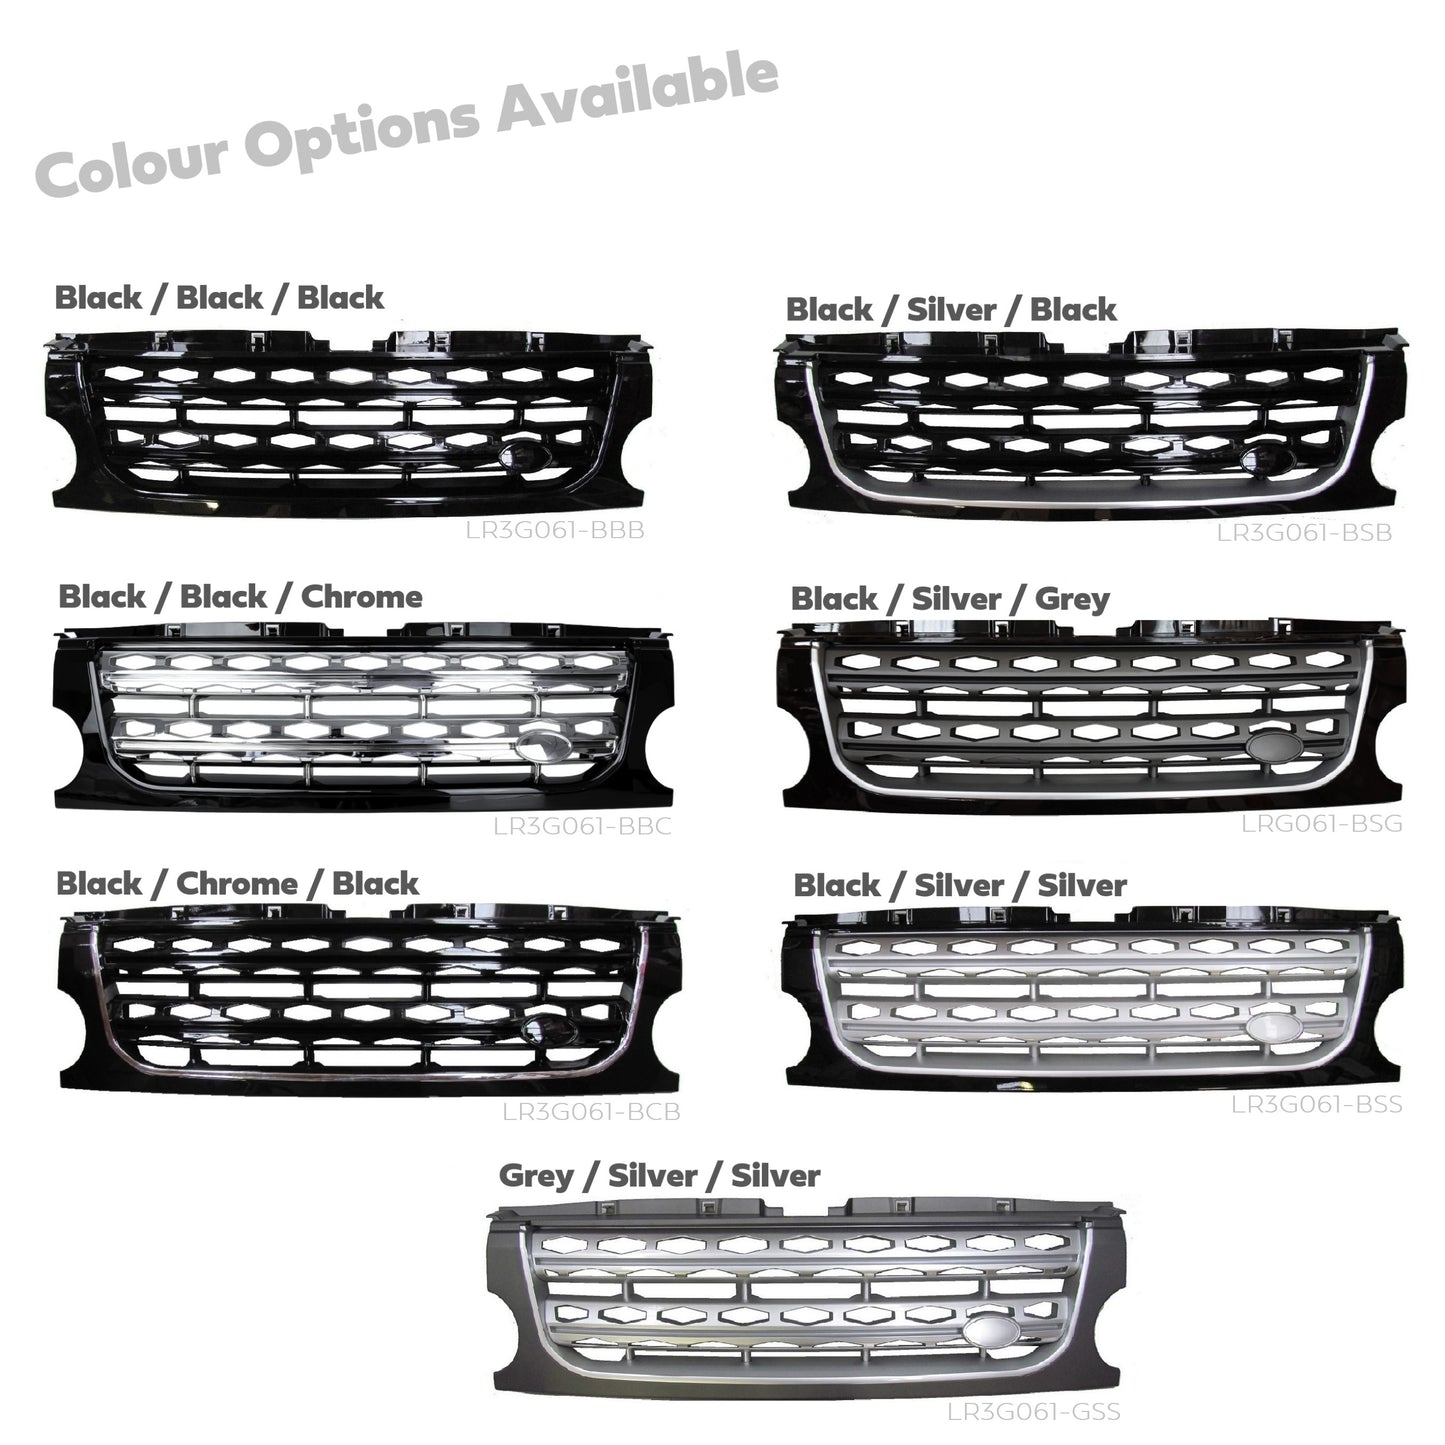 Front Grille for Land Rover Discovery 3 - Disco 4 look - Black / Black / Chrome